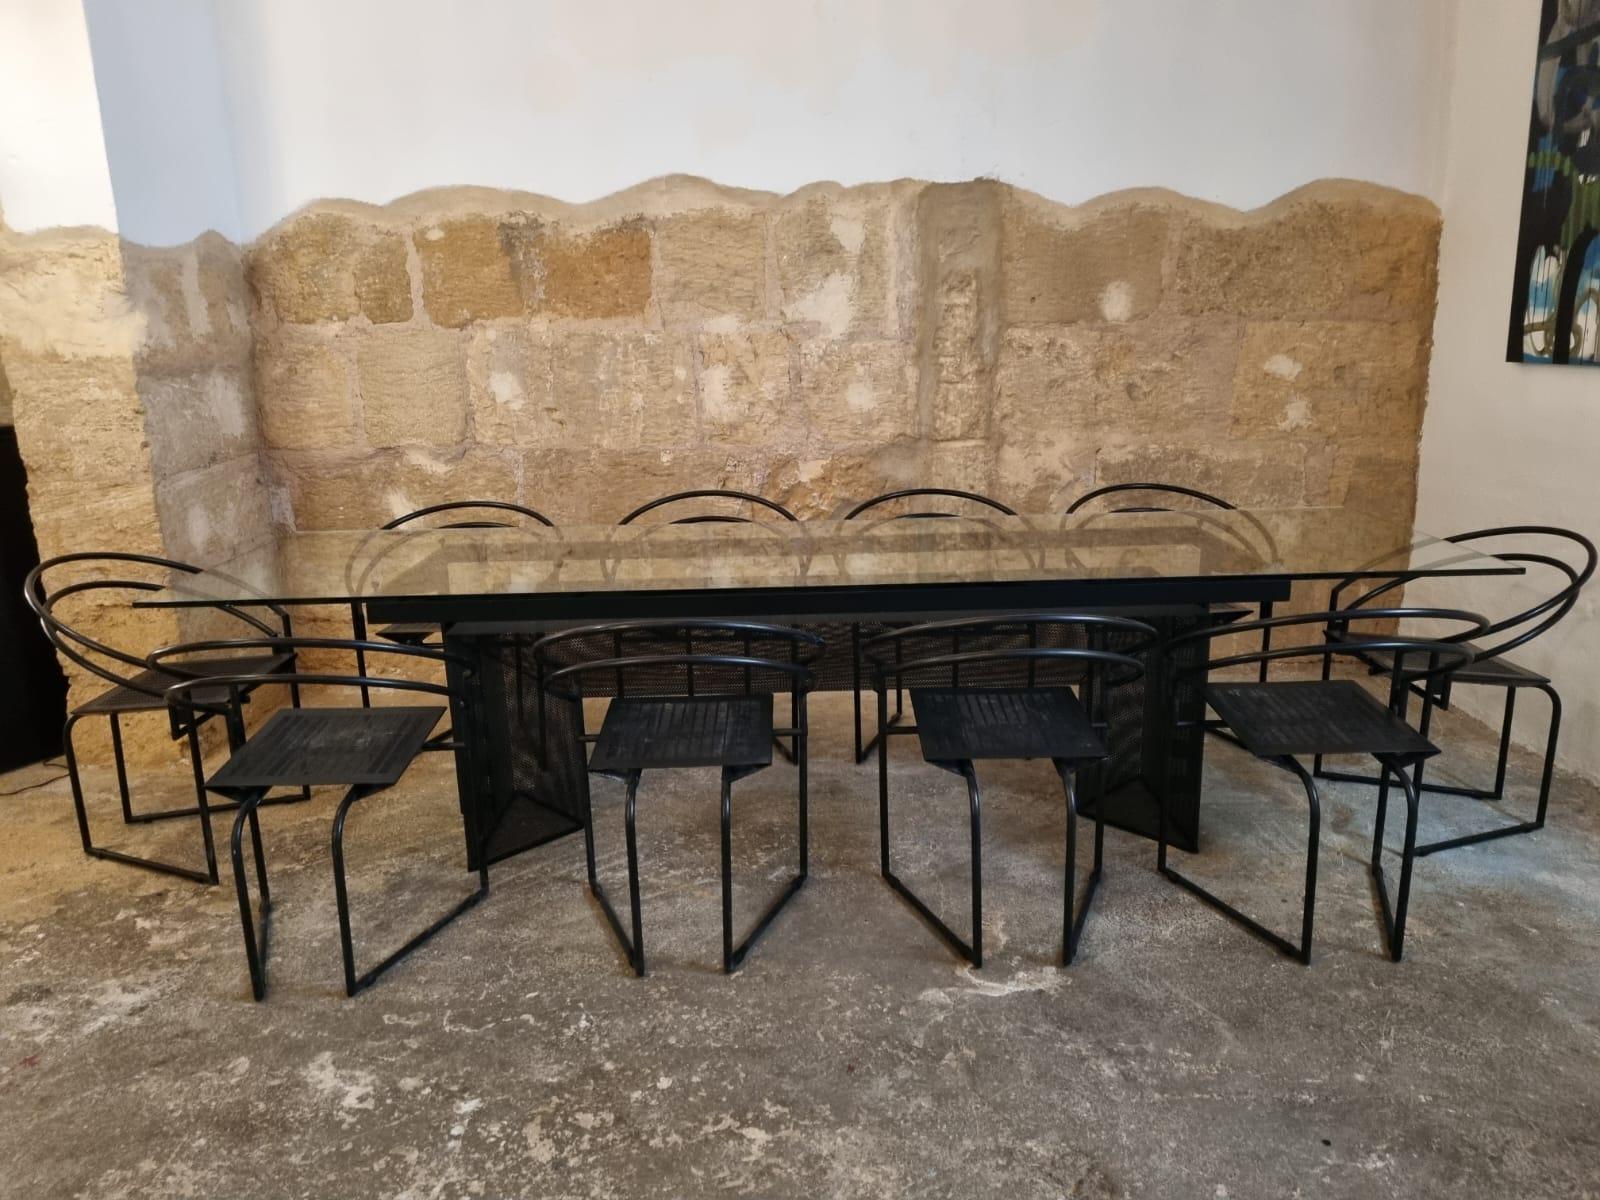 Gorgeous all original dining set by Mario Botta for Alias, Italy 1985, composed of large dining table and 10x La Tonda chairs, excellent condition overall

--Table and/or Chairs CAN be sold separately if interested--

Approximately Dimensions
length